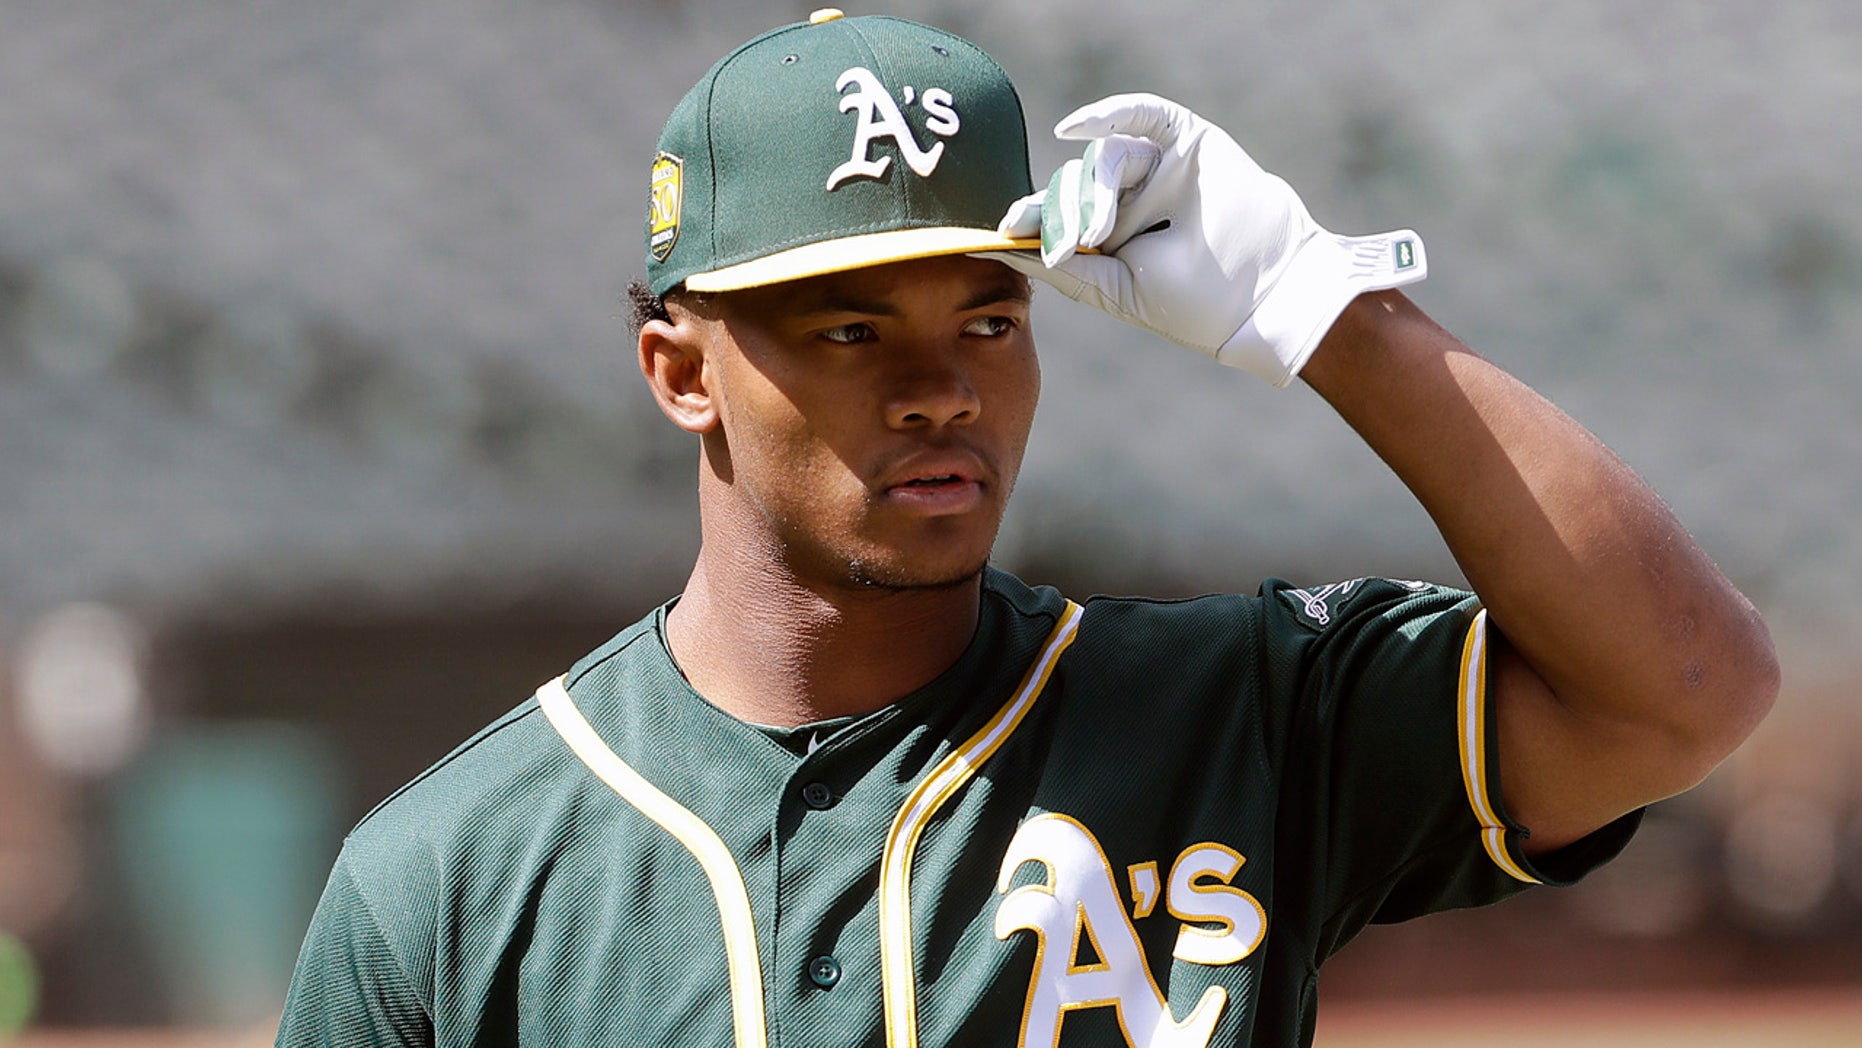 Kyler Murray To Enter Nfl Draft After Dalliance With Major League